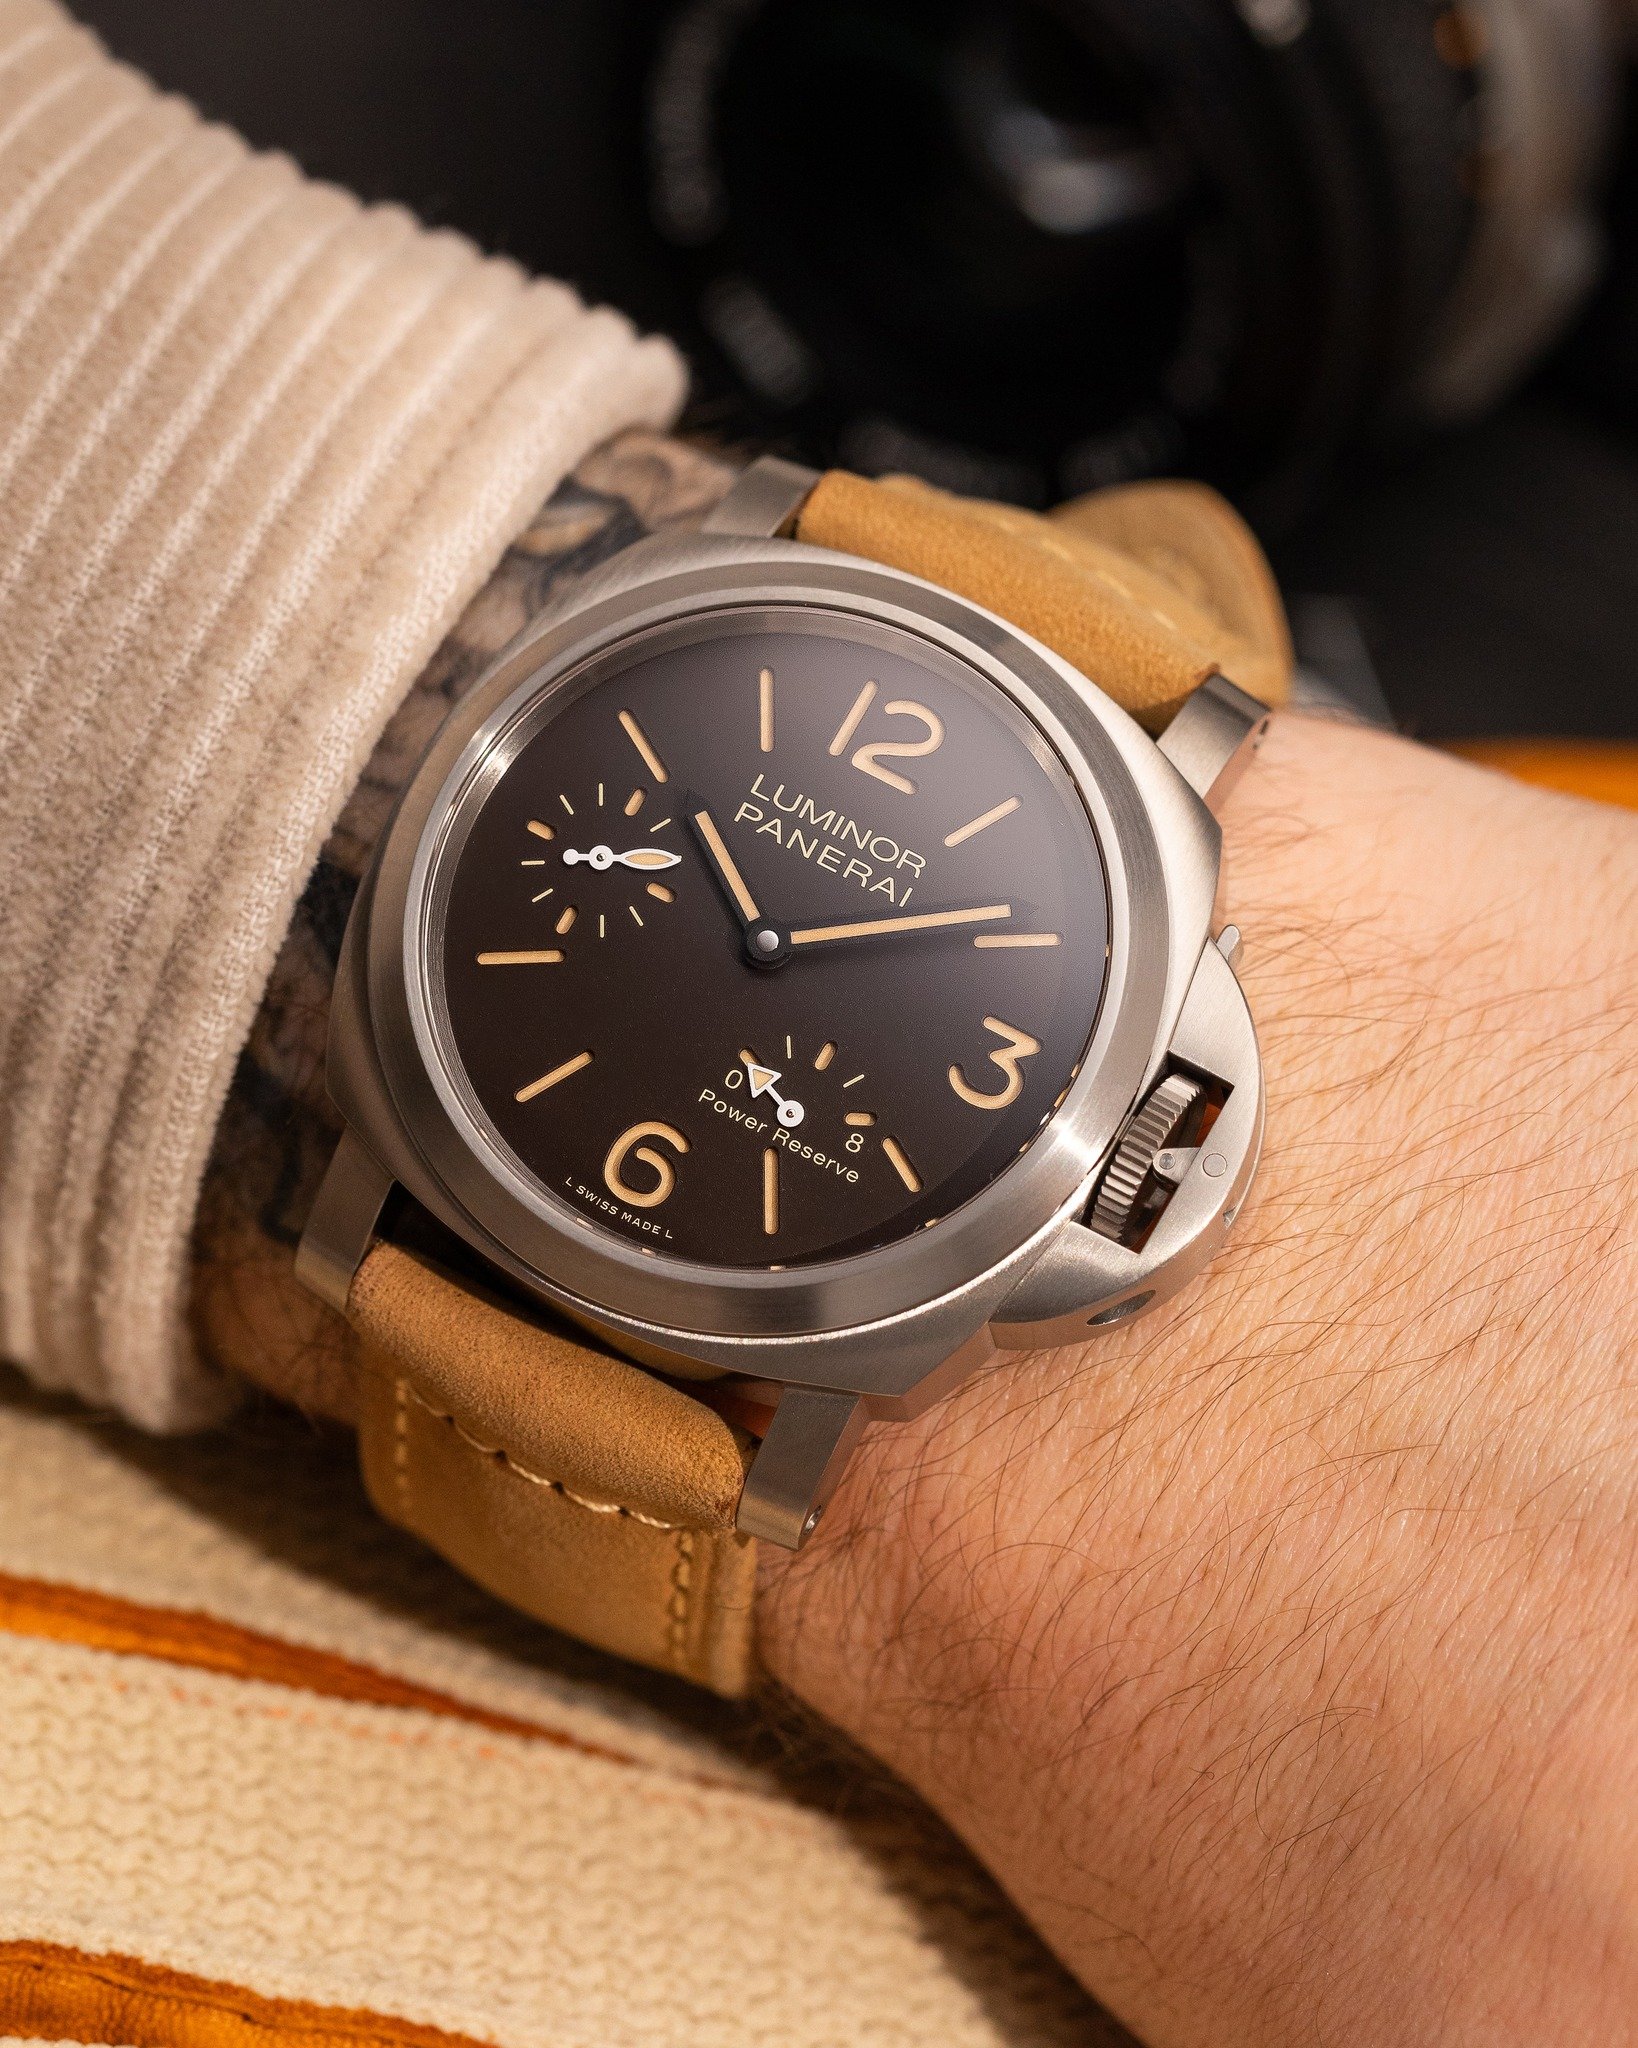 What do you think of the matching strap and markers colour combo? 
Panerai Luminor Watch, PAM00797 - W011139

 #Panerai #panerailuminormarina #paneraiwatch #panerailuminor #paneraiwatches #watchesuk #thewatchbarnbychrono24 #thewatchbarn #chrono24 #ch